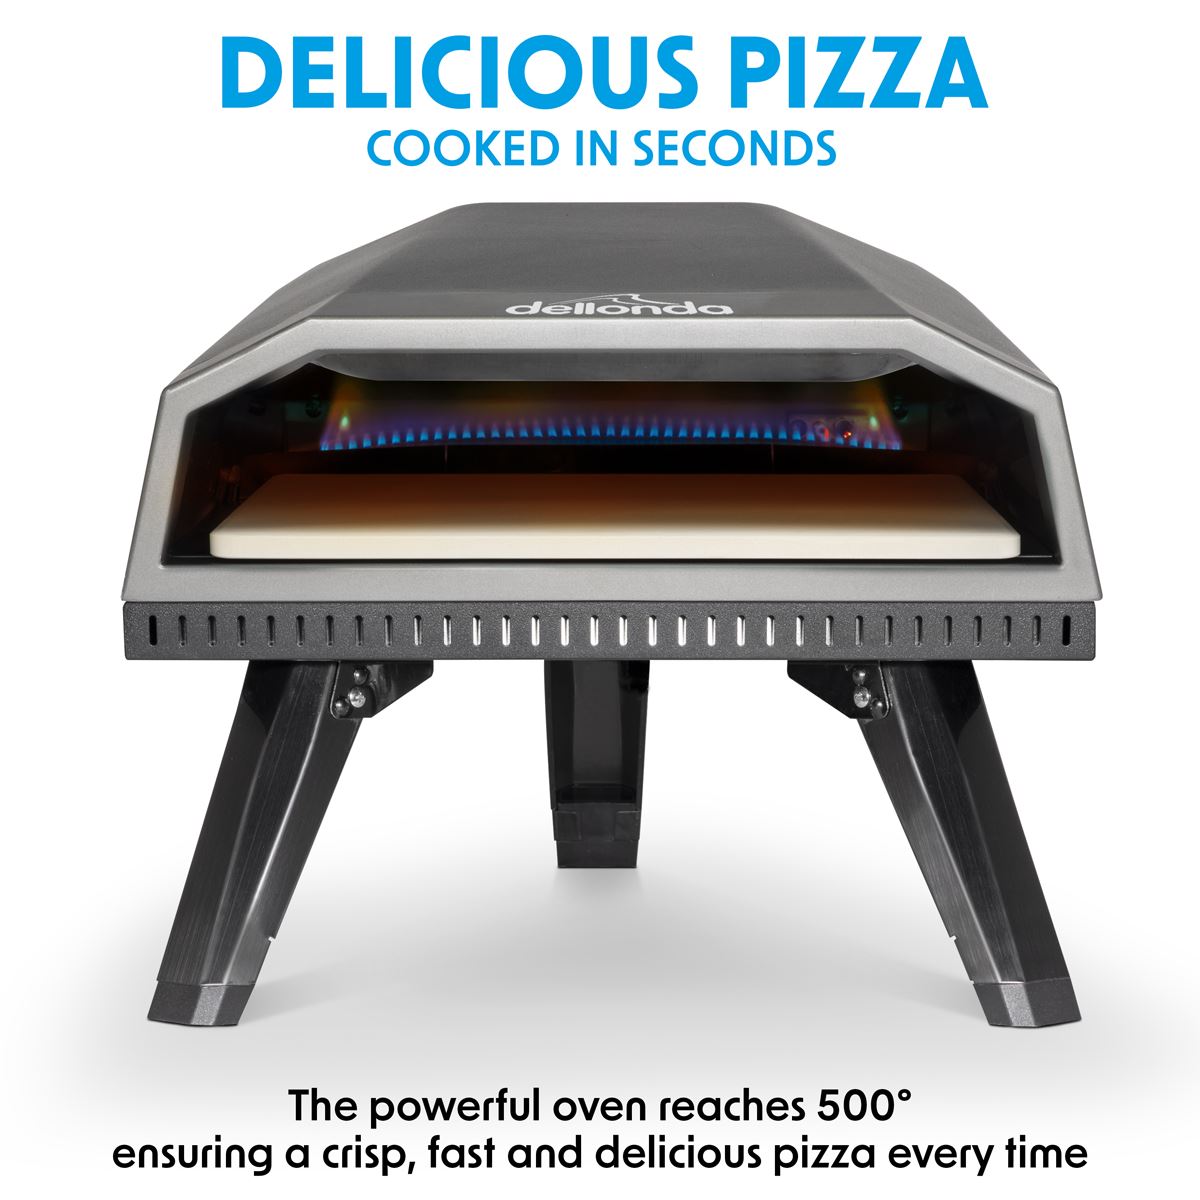 Dellonda Gas Pizza Oven with Gas Regulator, Water Resistant Cover/Carry Bag & 12" Pizza Peel